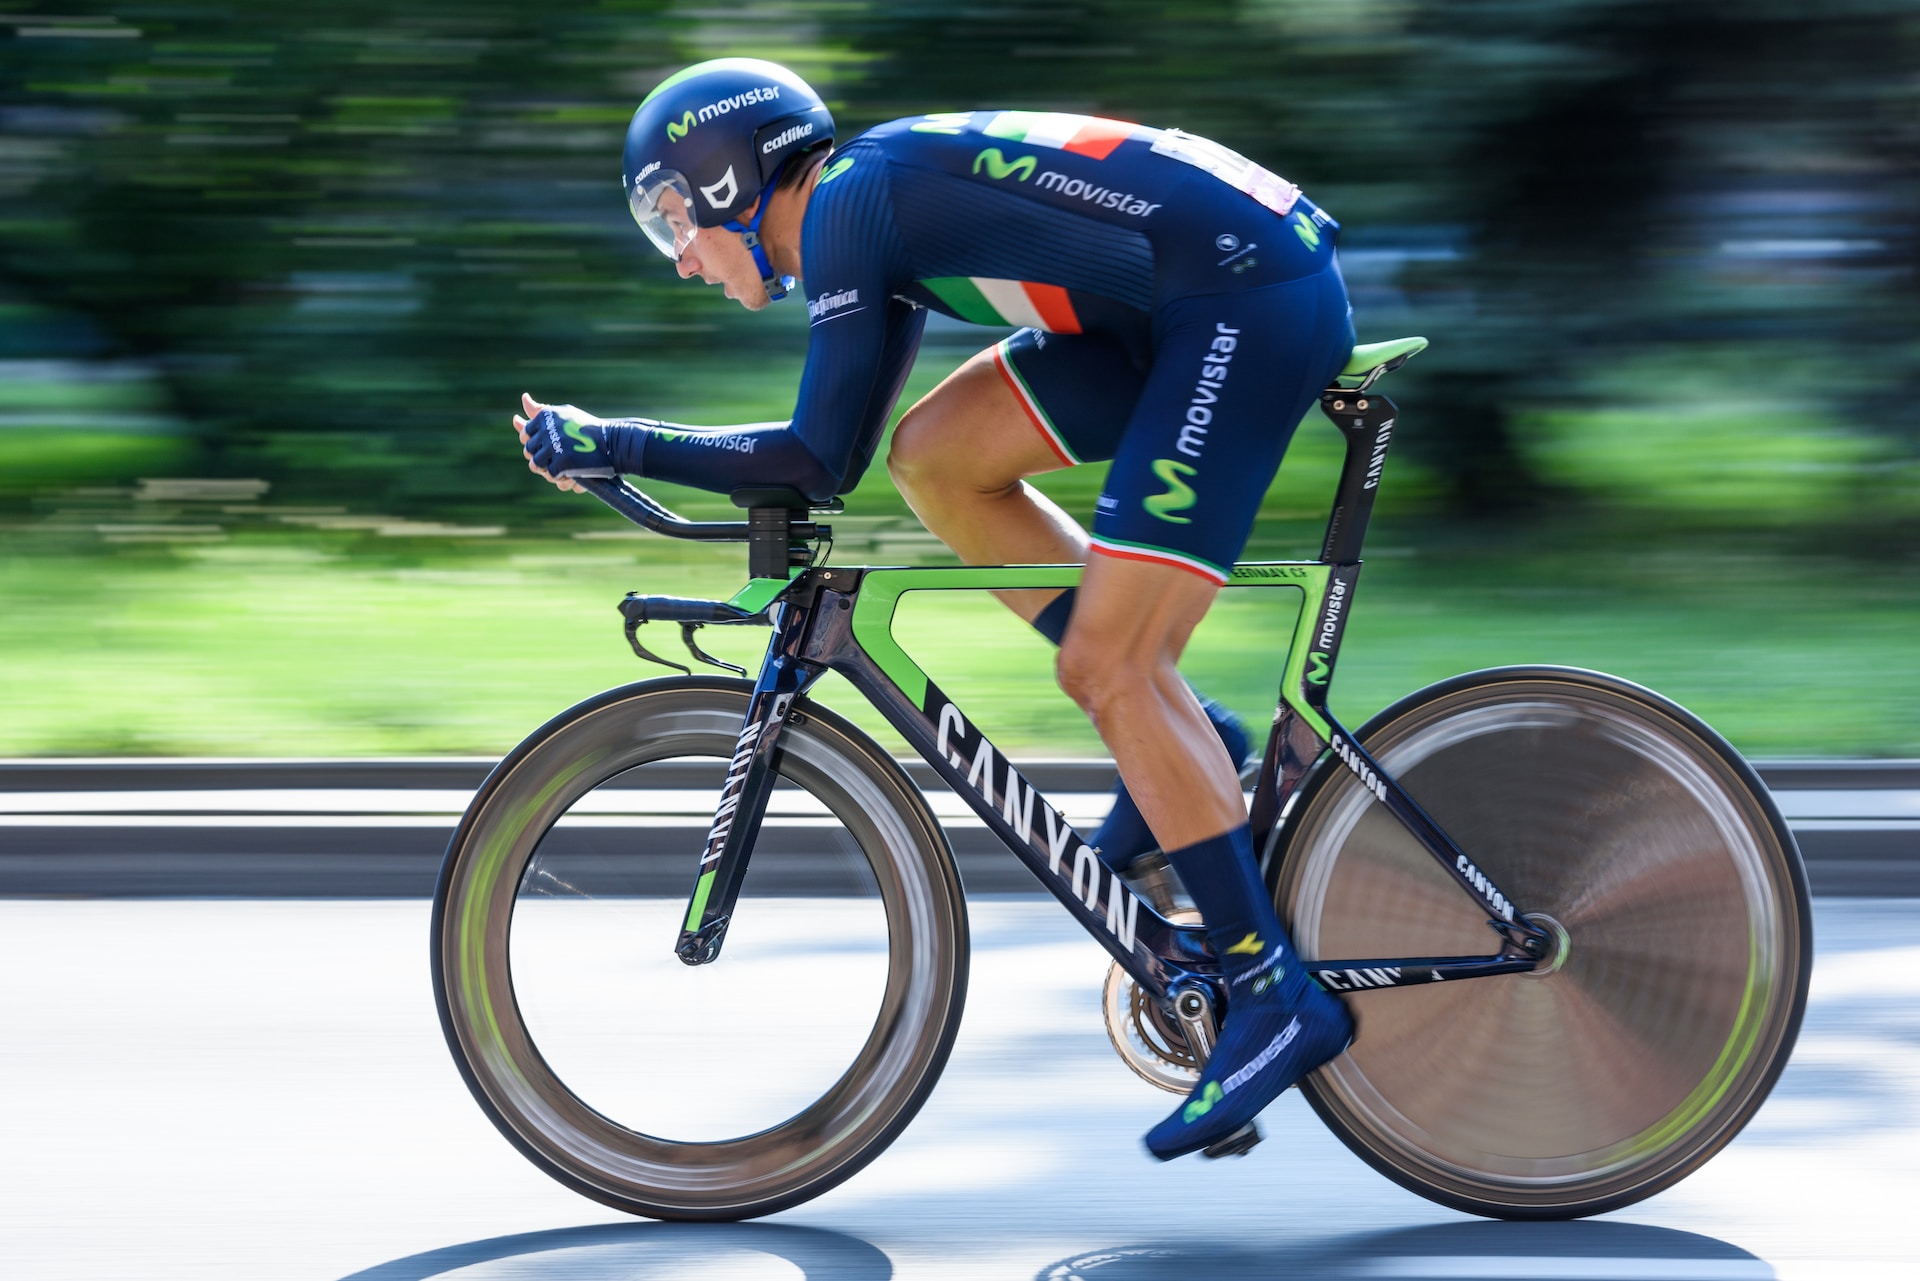 On this image you can see the importance of aerodynamics when choosing a bike for triathlon.